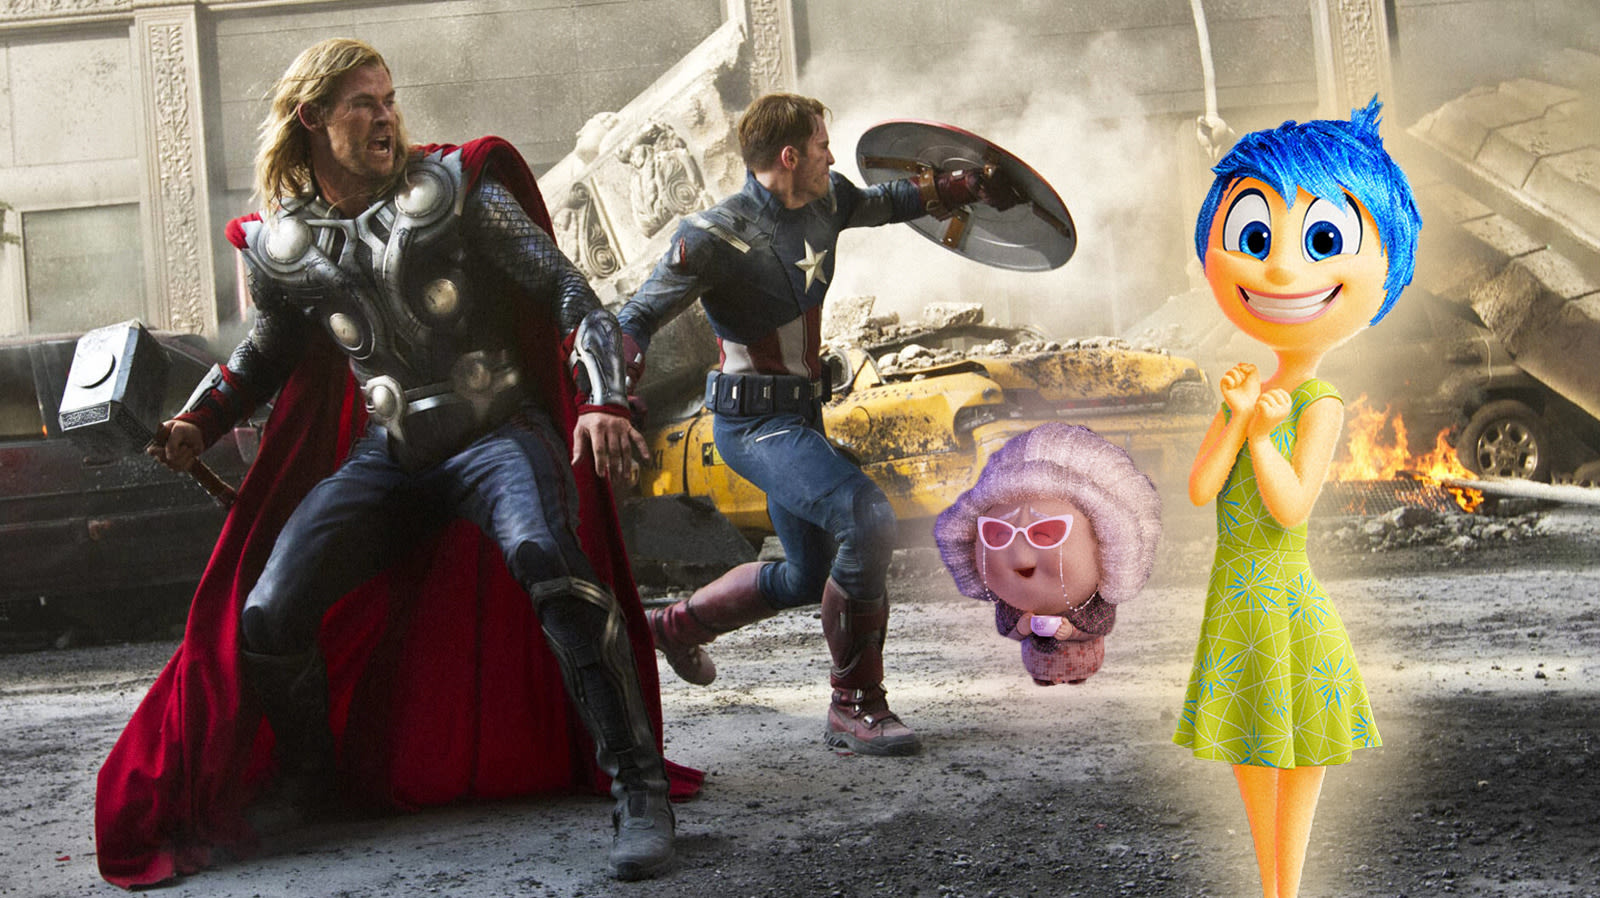 Inside Out 2 Just Kicked The Avengers Out Of The All-Time Box Office Top 10 - SlashFilm